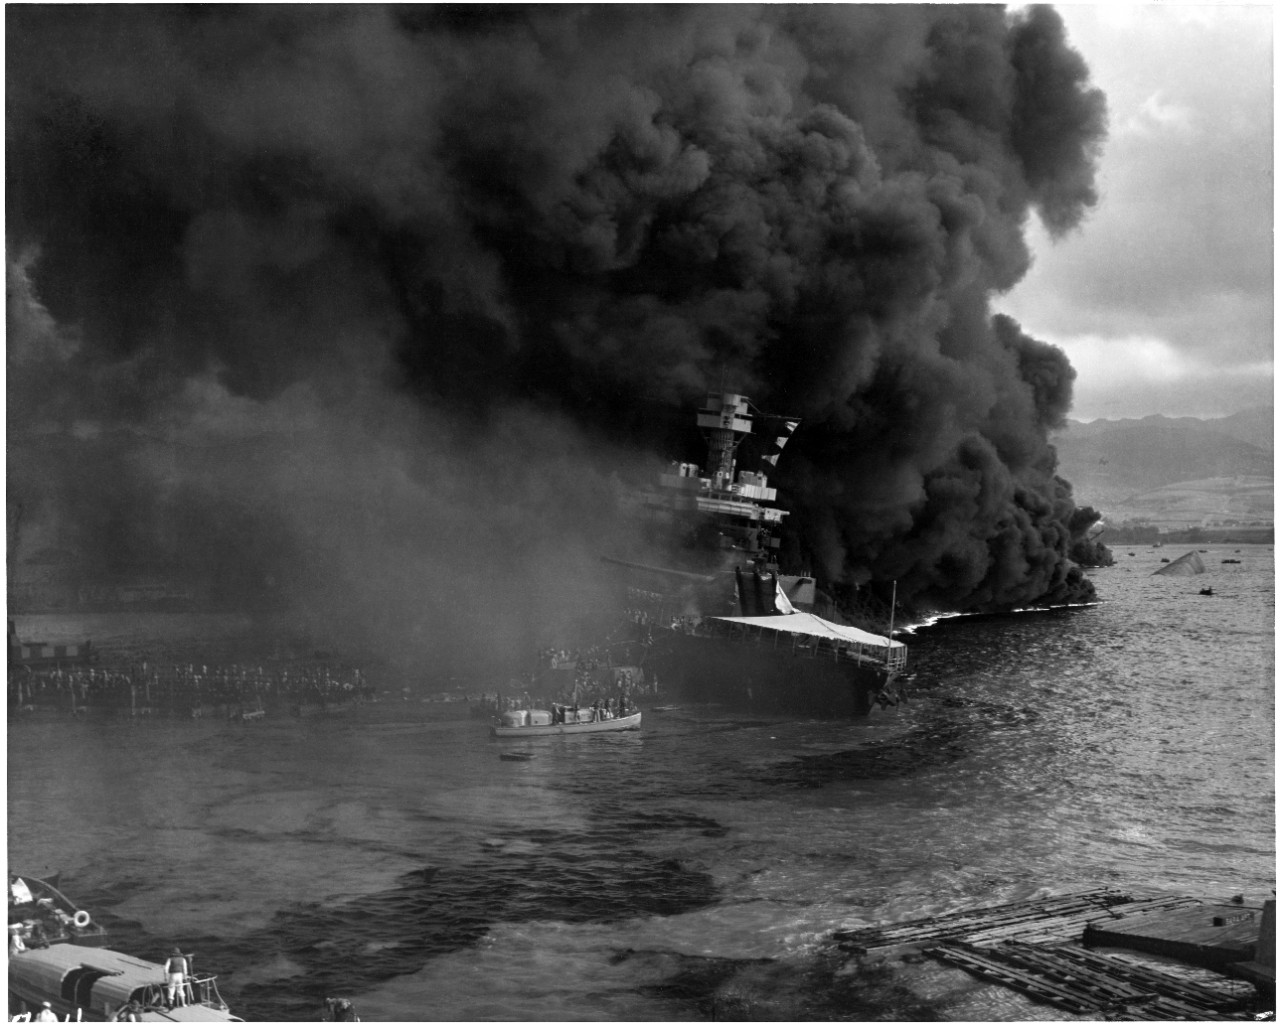 Photo #: NH 97399  Pearl Harbor Attack, 7 December 1941 For a MEDIUM RESOLUTION IMAGE, click the thumbnail.